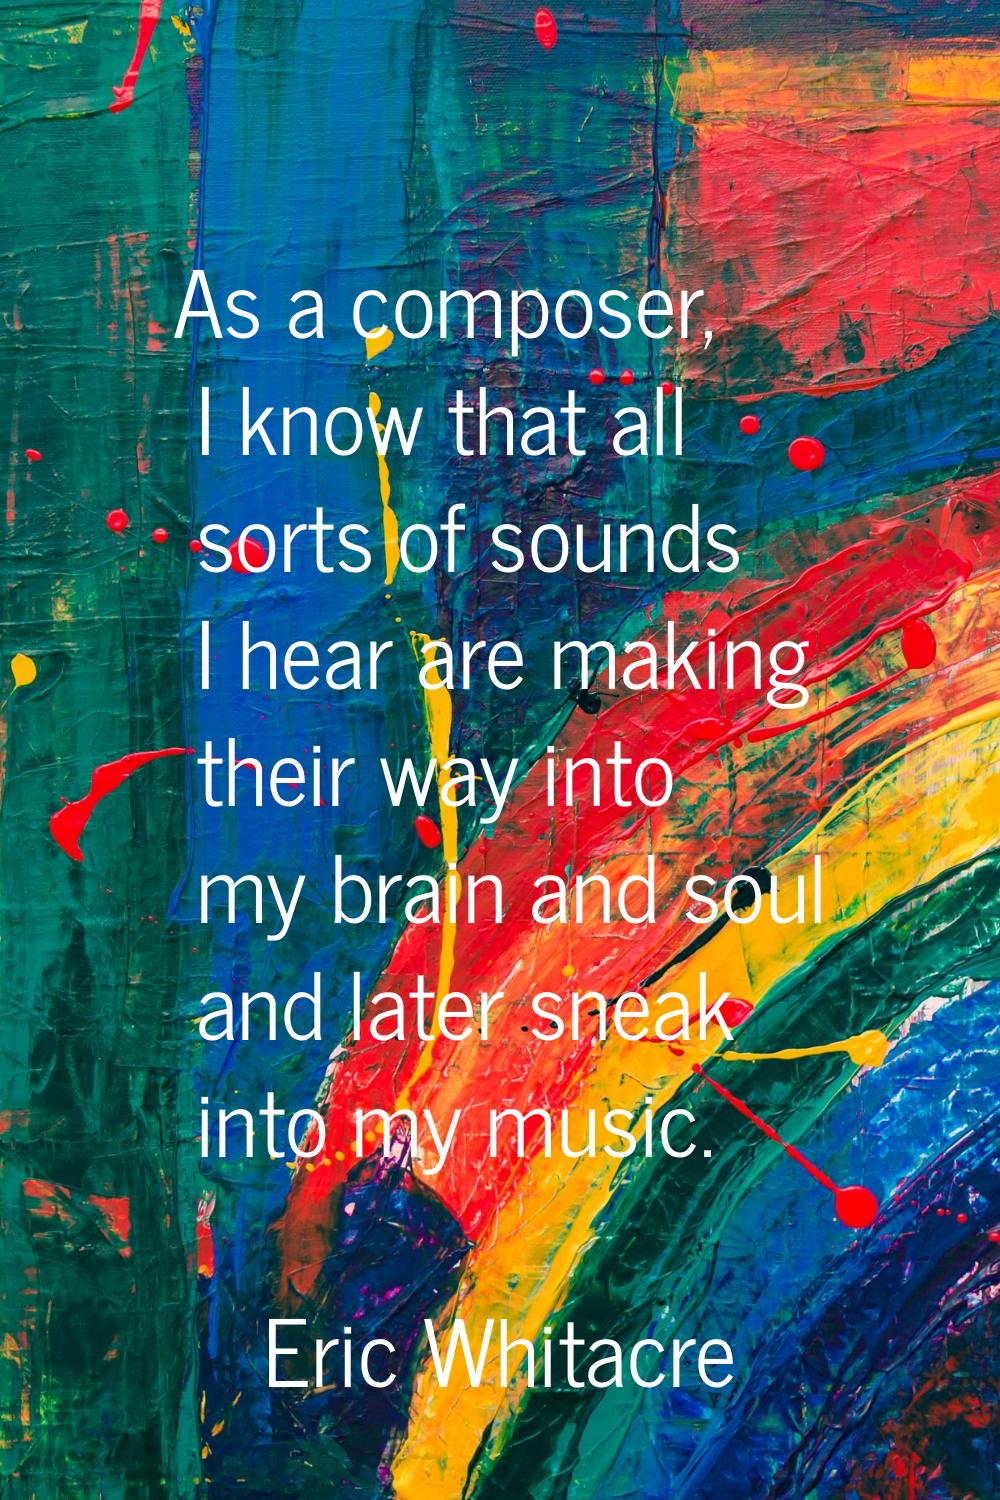 As a composer, I know that all sorts of sounds I hear are making their way into my brain and soul a